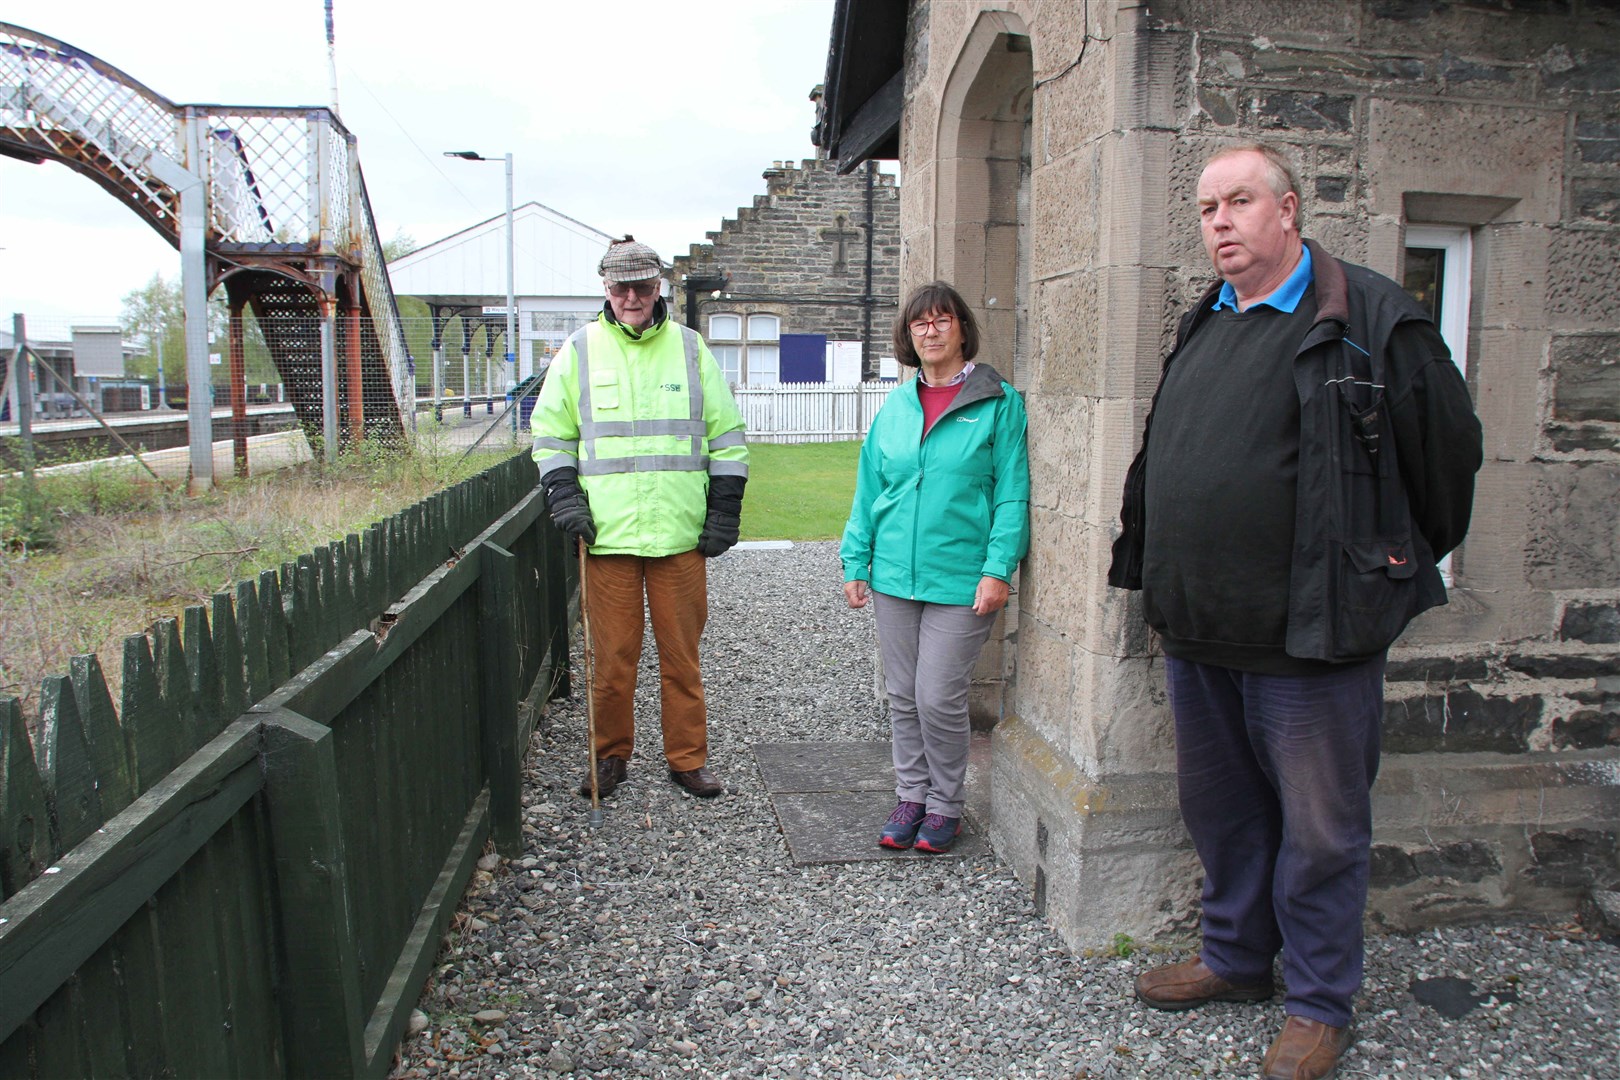 GETTING CROSS: Joe Taylor (left) with Kingussie Community Council members Janet Kinnaird and Ruaridh Ormiston at the Station Master’s House at the town’s railway station.